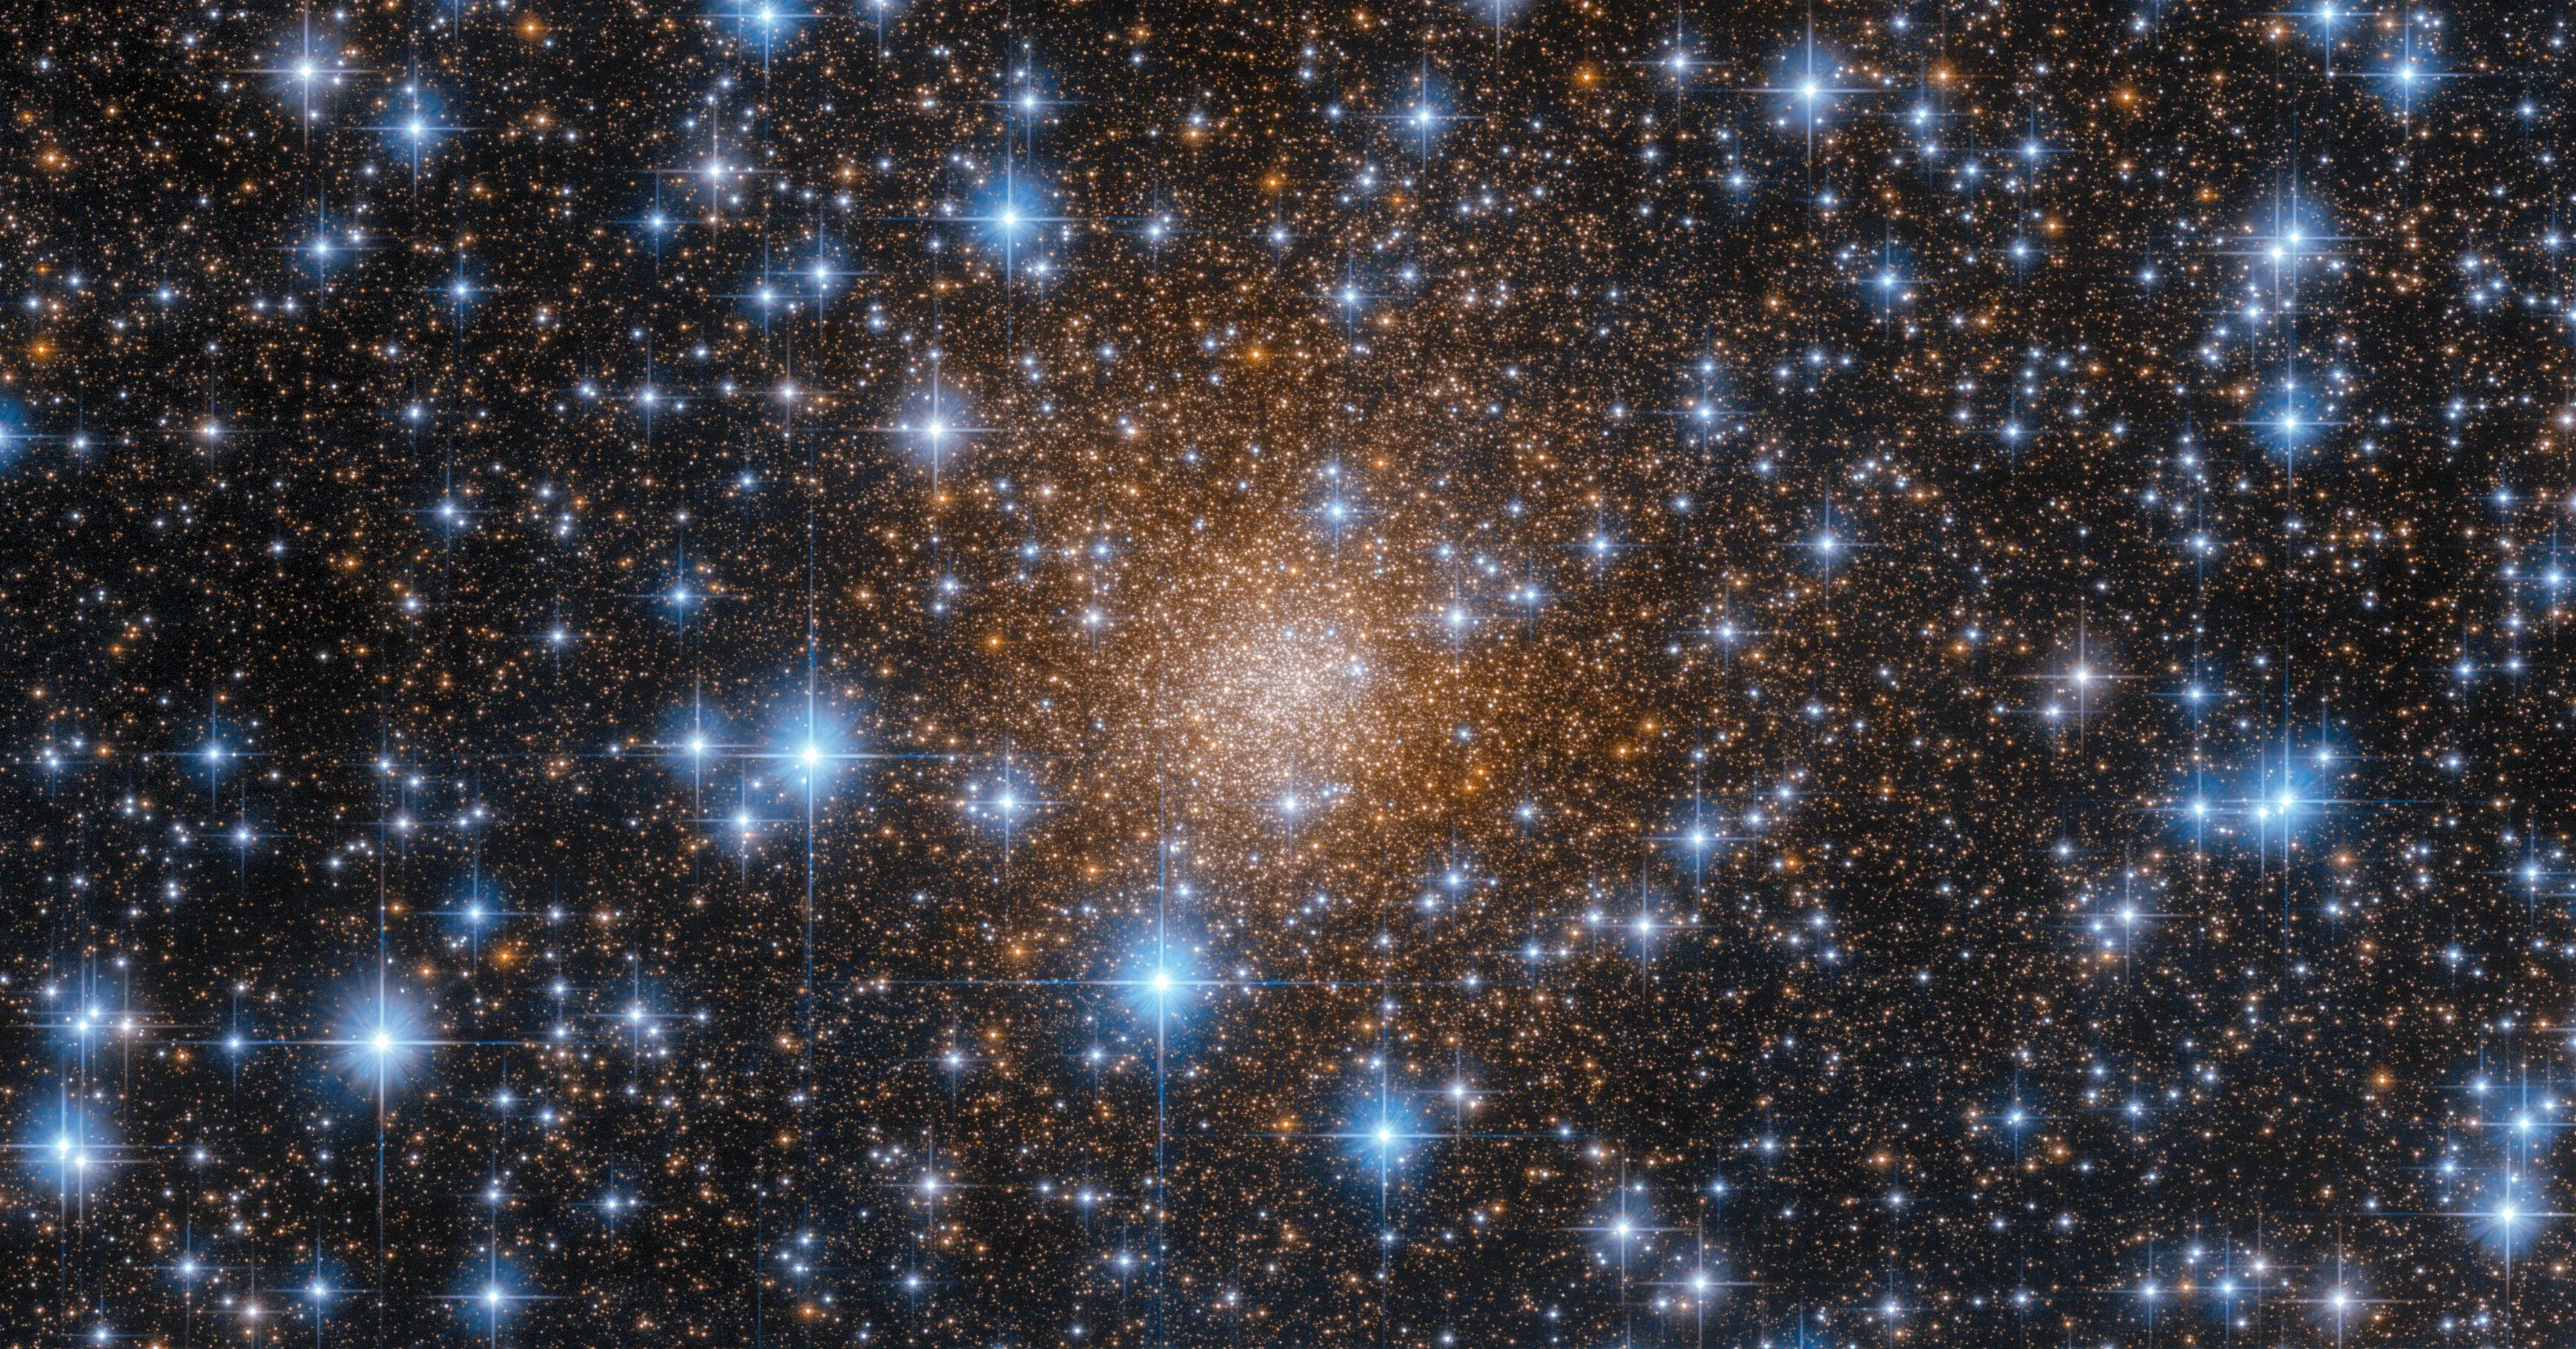 Bright, reddish-gold spherical swarm of stars fills the center of the image. Even brighter blue-white foreground stars dot the entire scene.